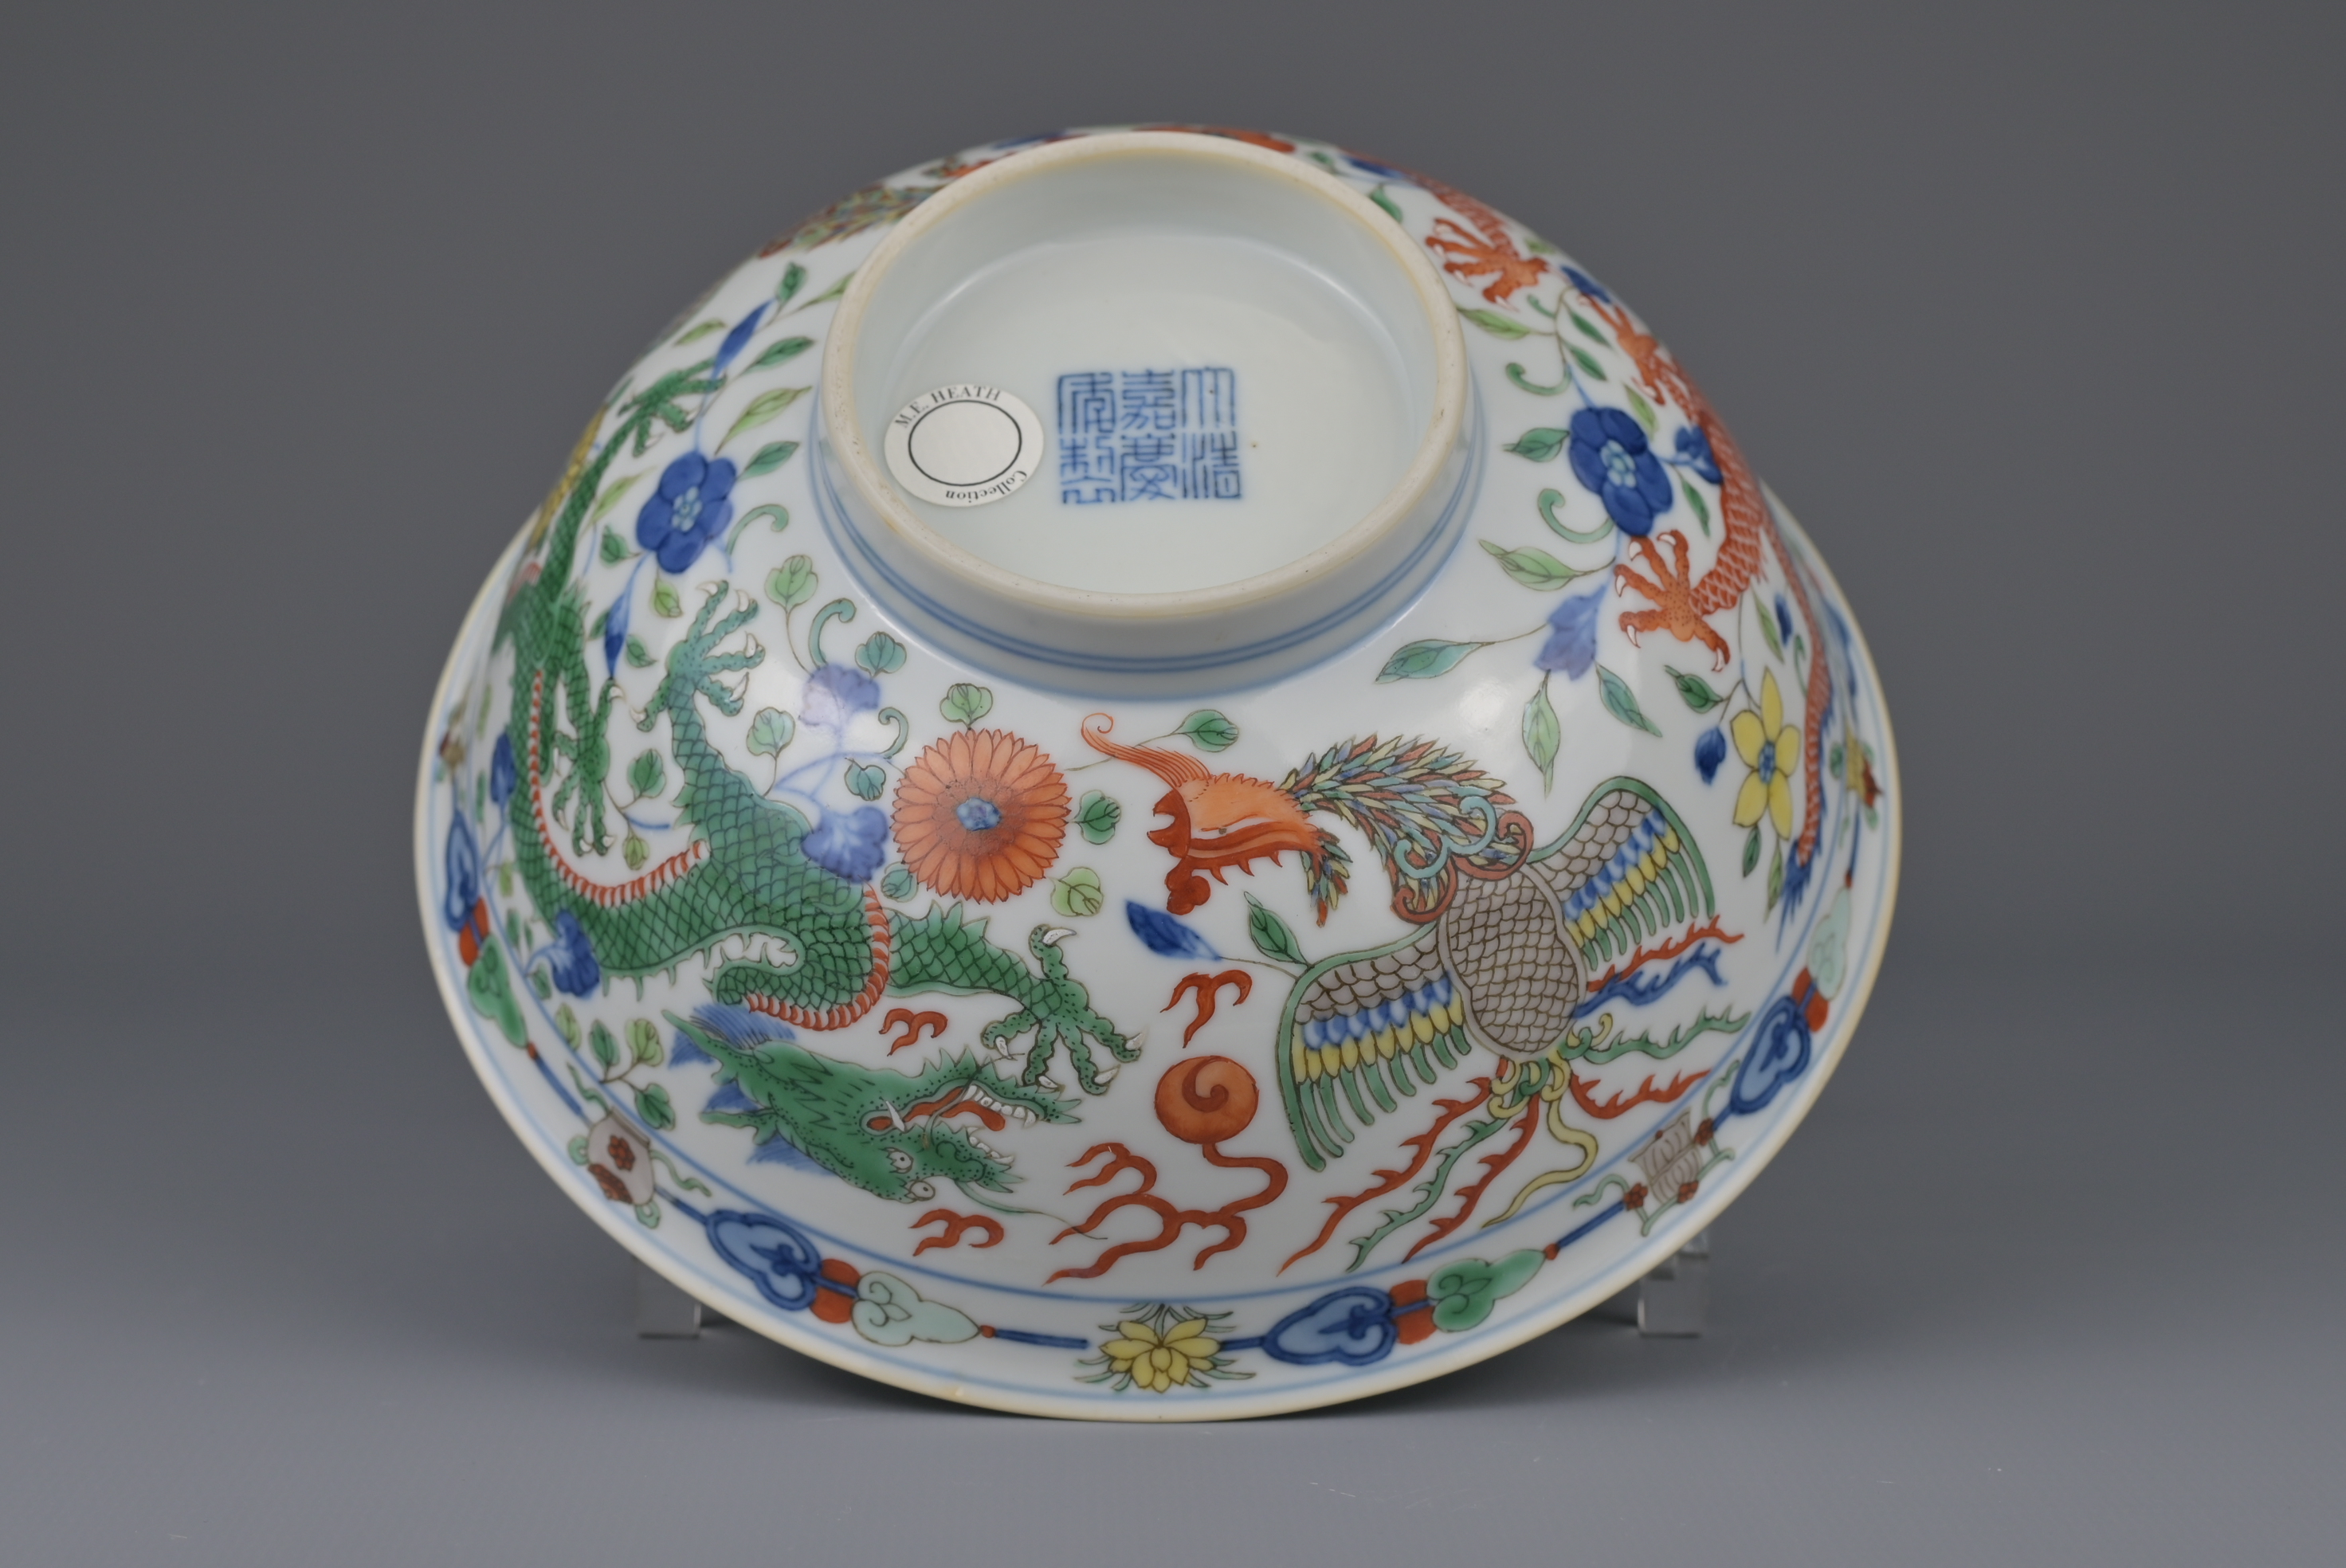 FINE CHINESE WUCAI ‘DRAGON & PHOENIX’ PORCELAIN BOWL, JIAQING MARK AND PERIOD, EARLY 19th CENTURY - Image 9 of 14